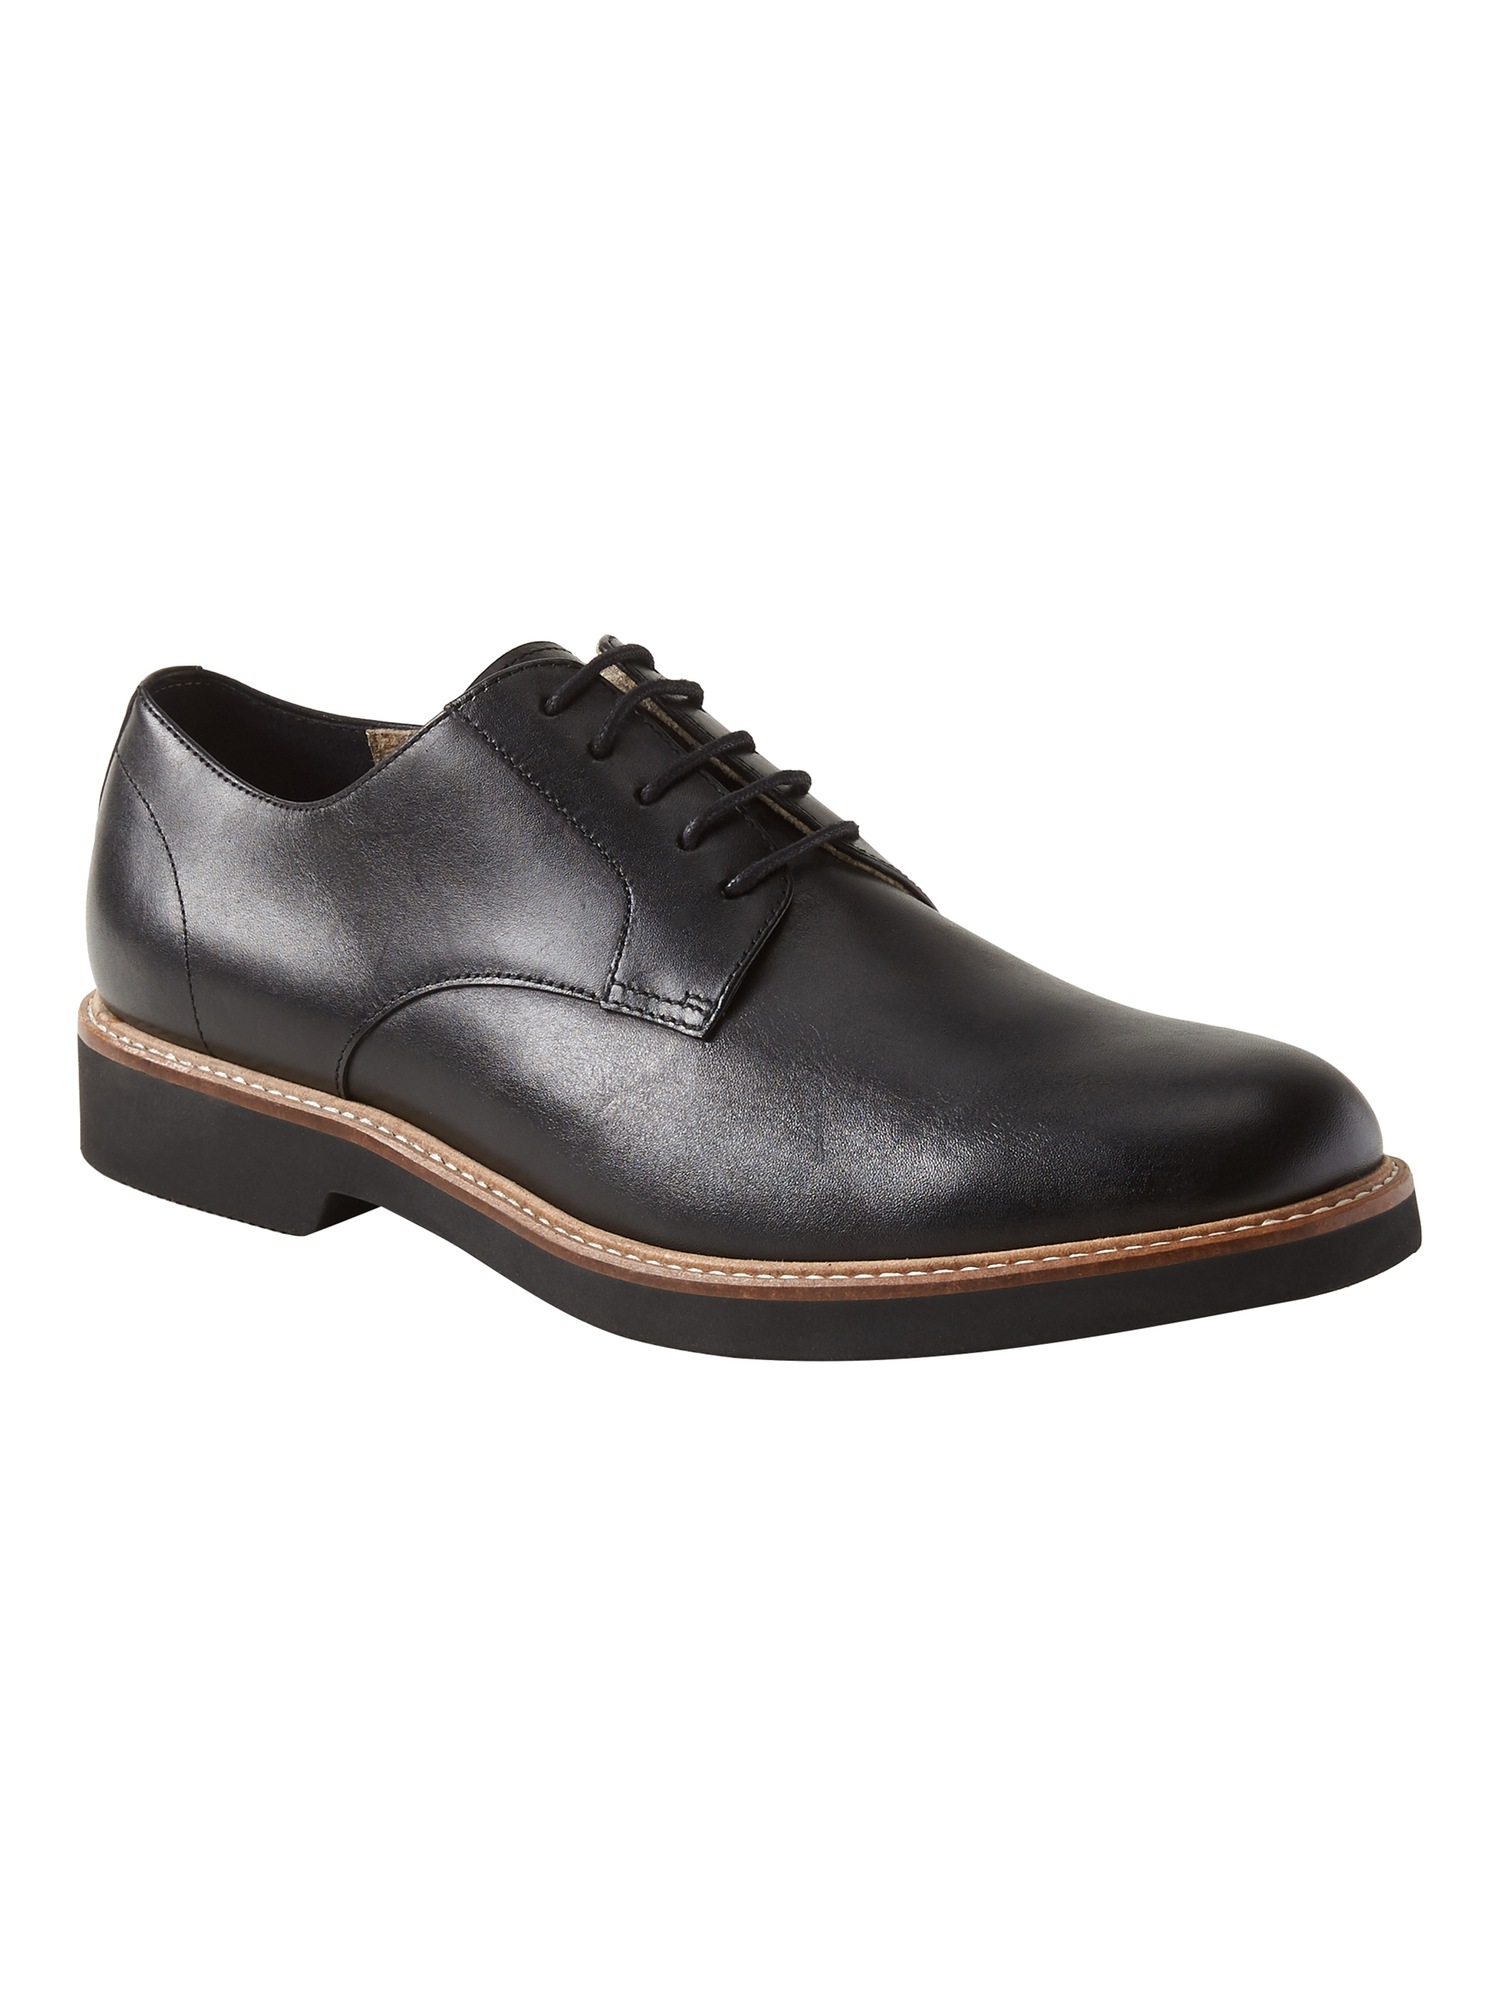 Nyle Italian Lace-Up Oxford